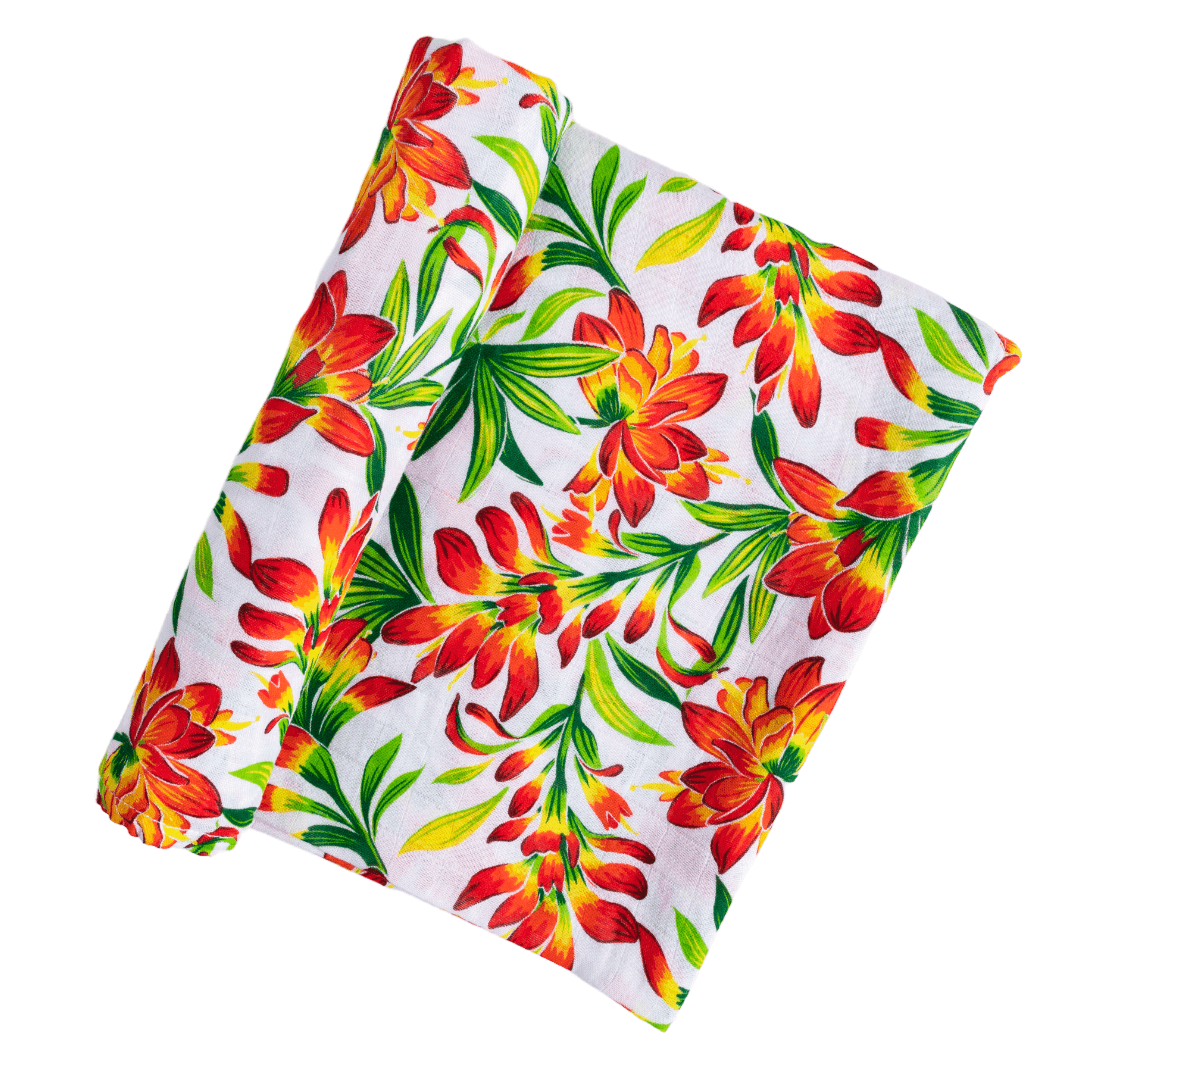 Prairie Fire baby muslin swaddle blanket and burp cloth set with vibrant floral design on a white background.